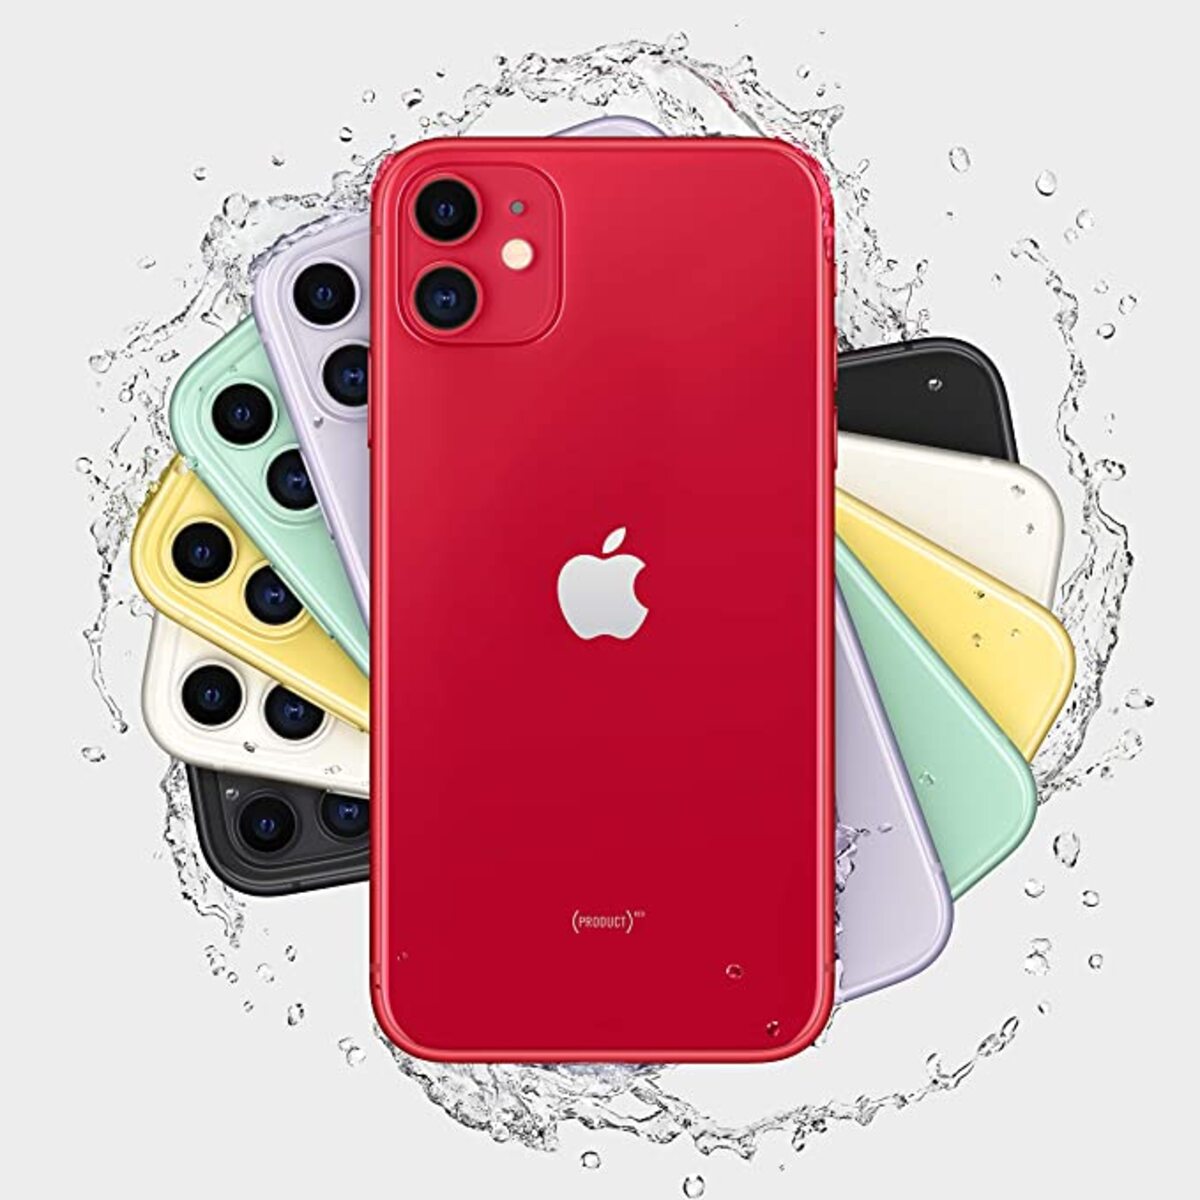 Apple Iphone 11 64gb Red - Middle East Version